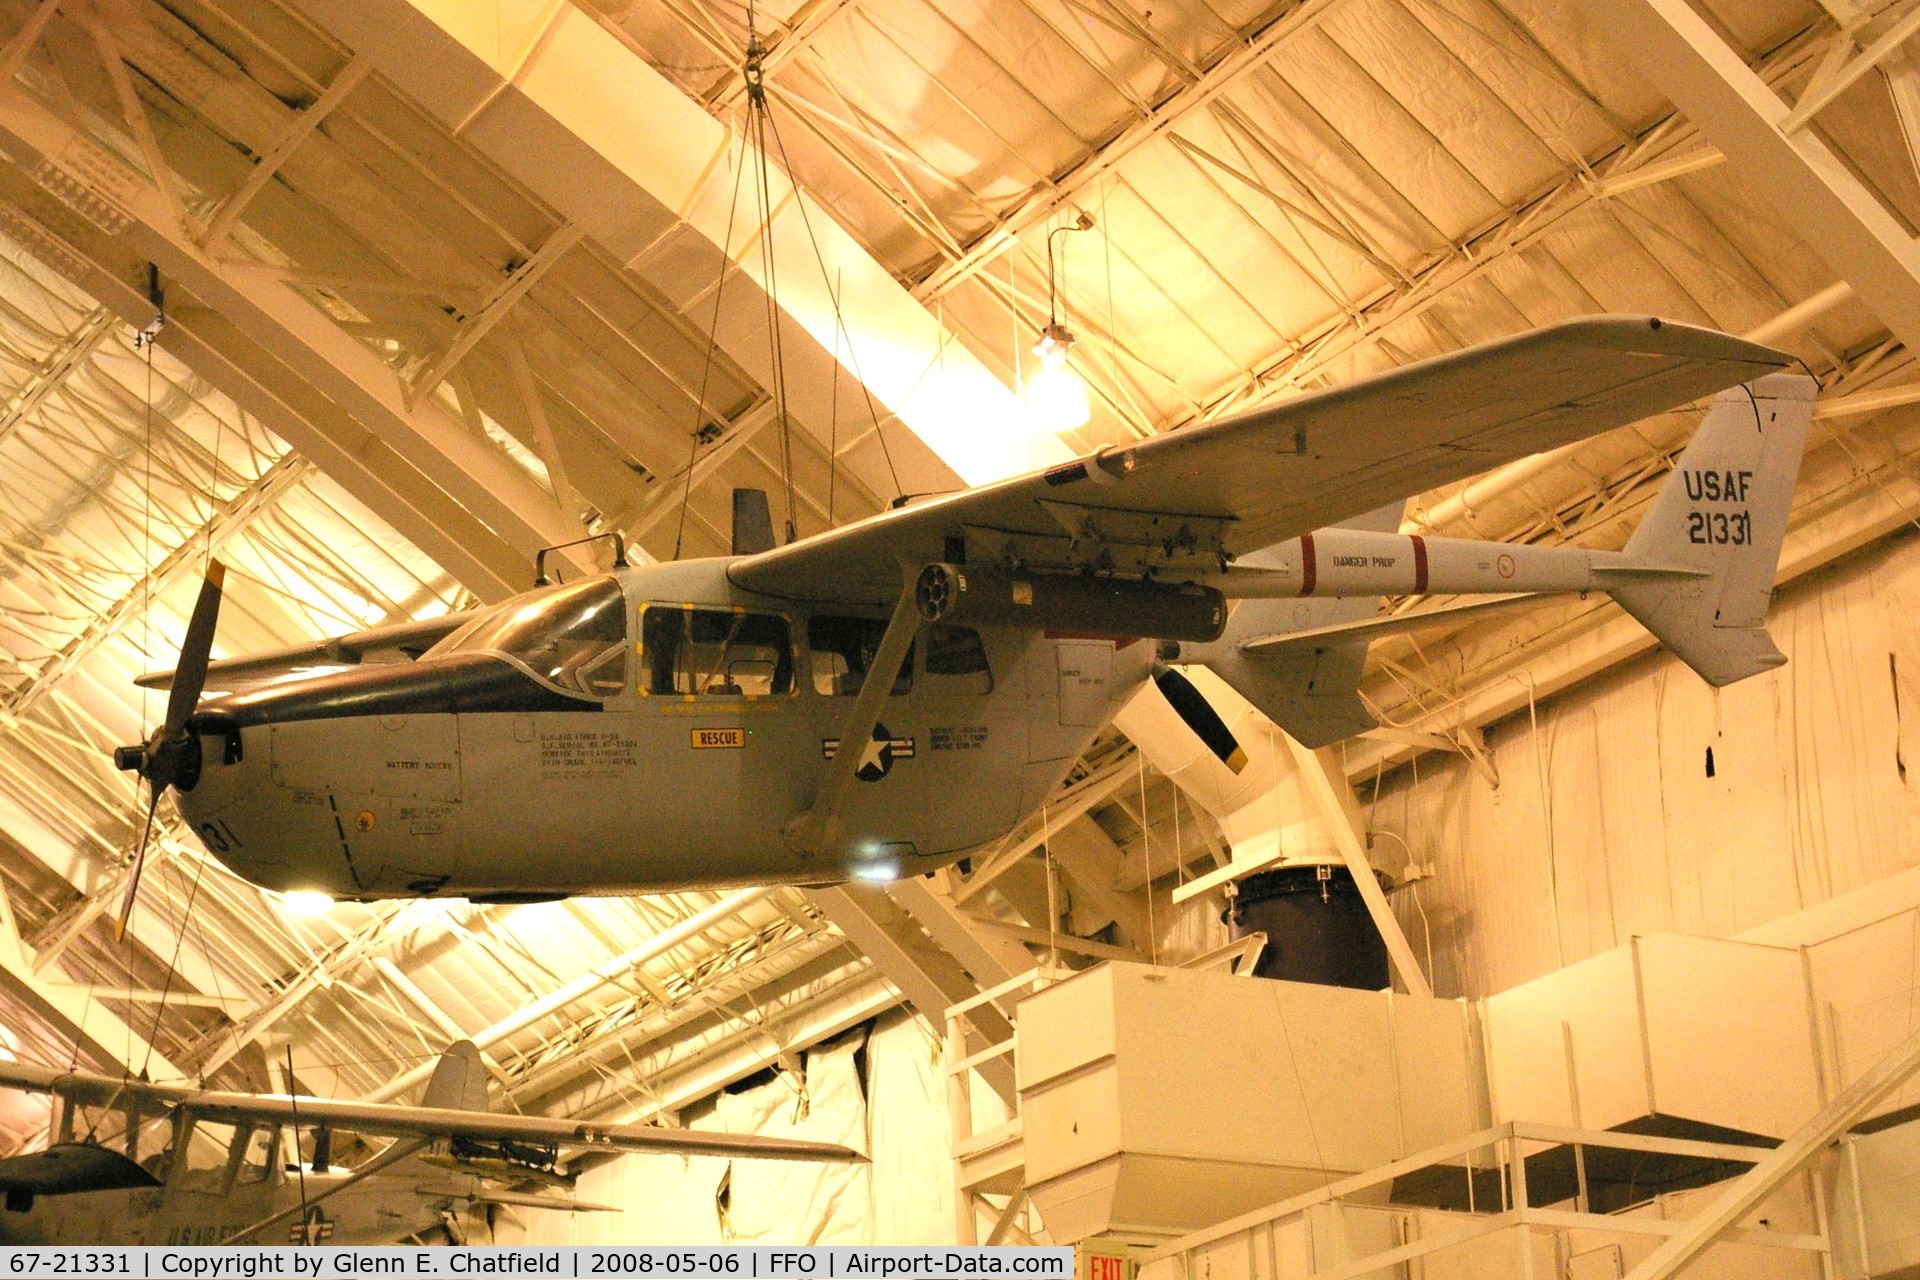 67-21331, 1967 Cessna O-2A Super Skymaster Super Skymaster C/N 337M-0037, Hanging from the ceiling in the National Museum of the U.S. Air Force